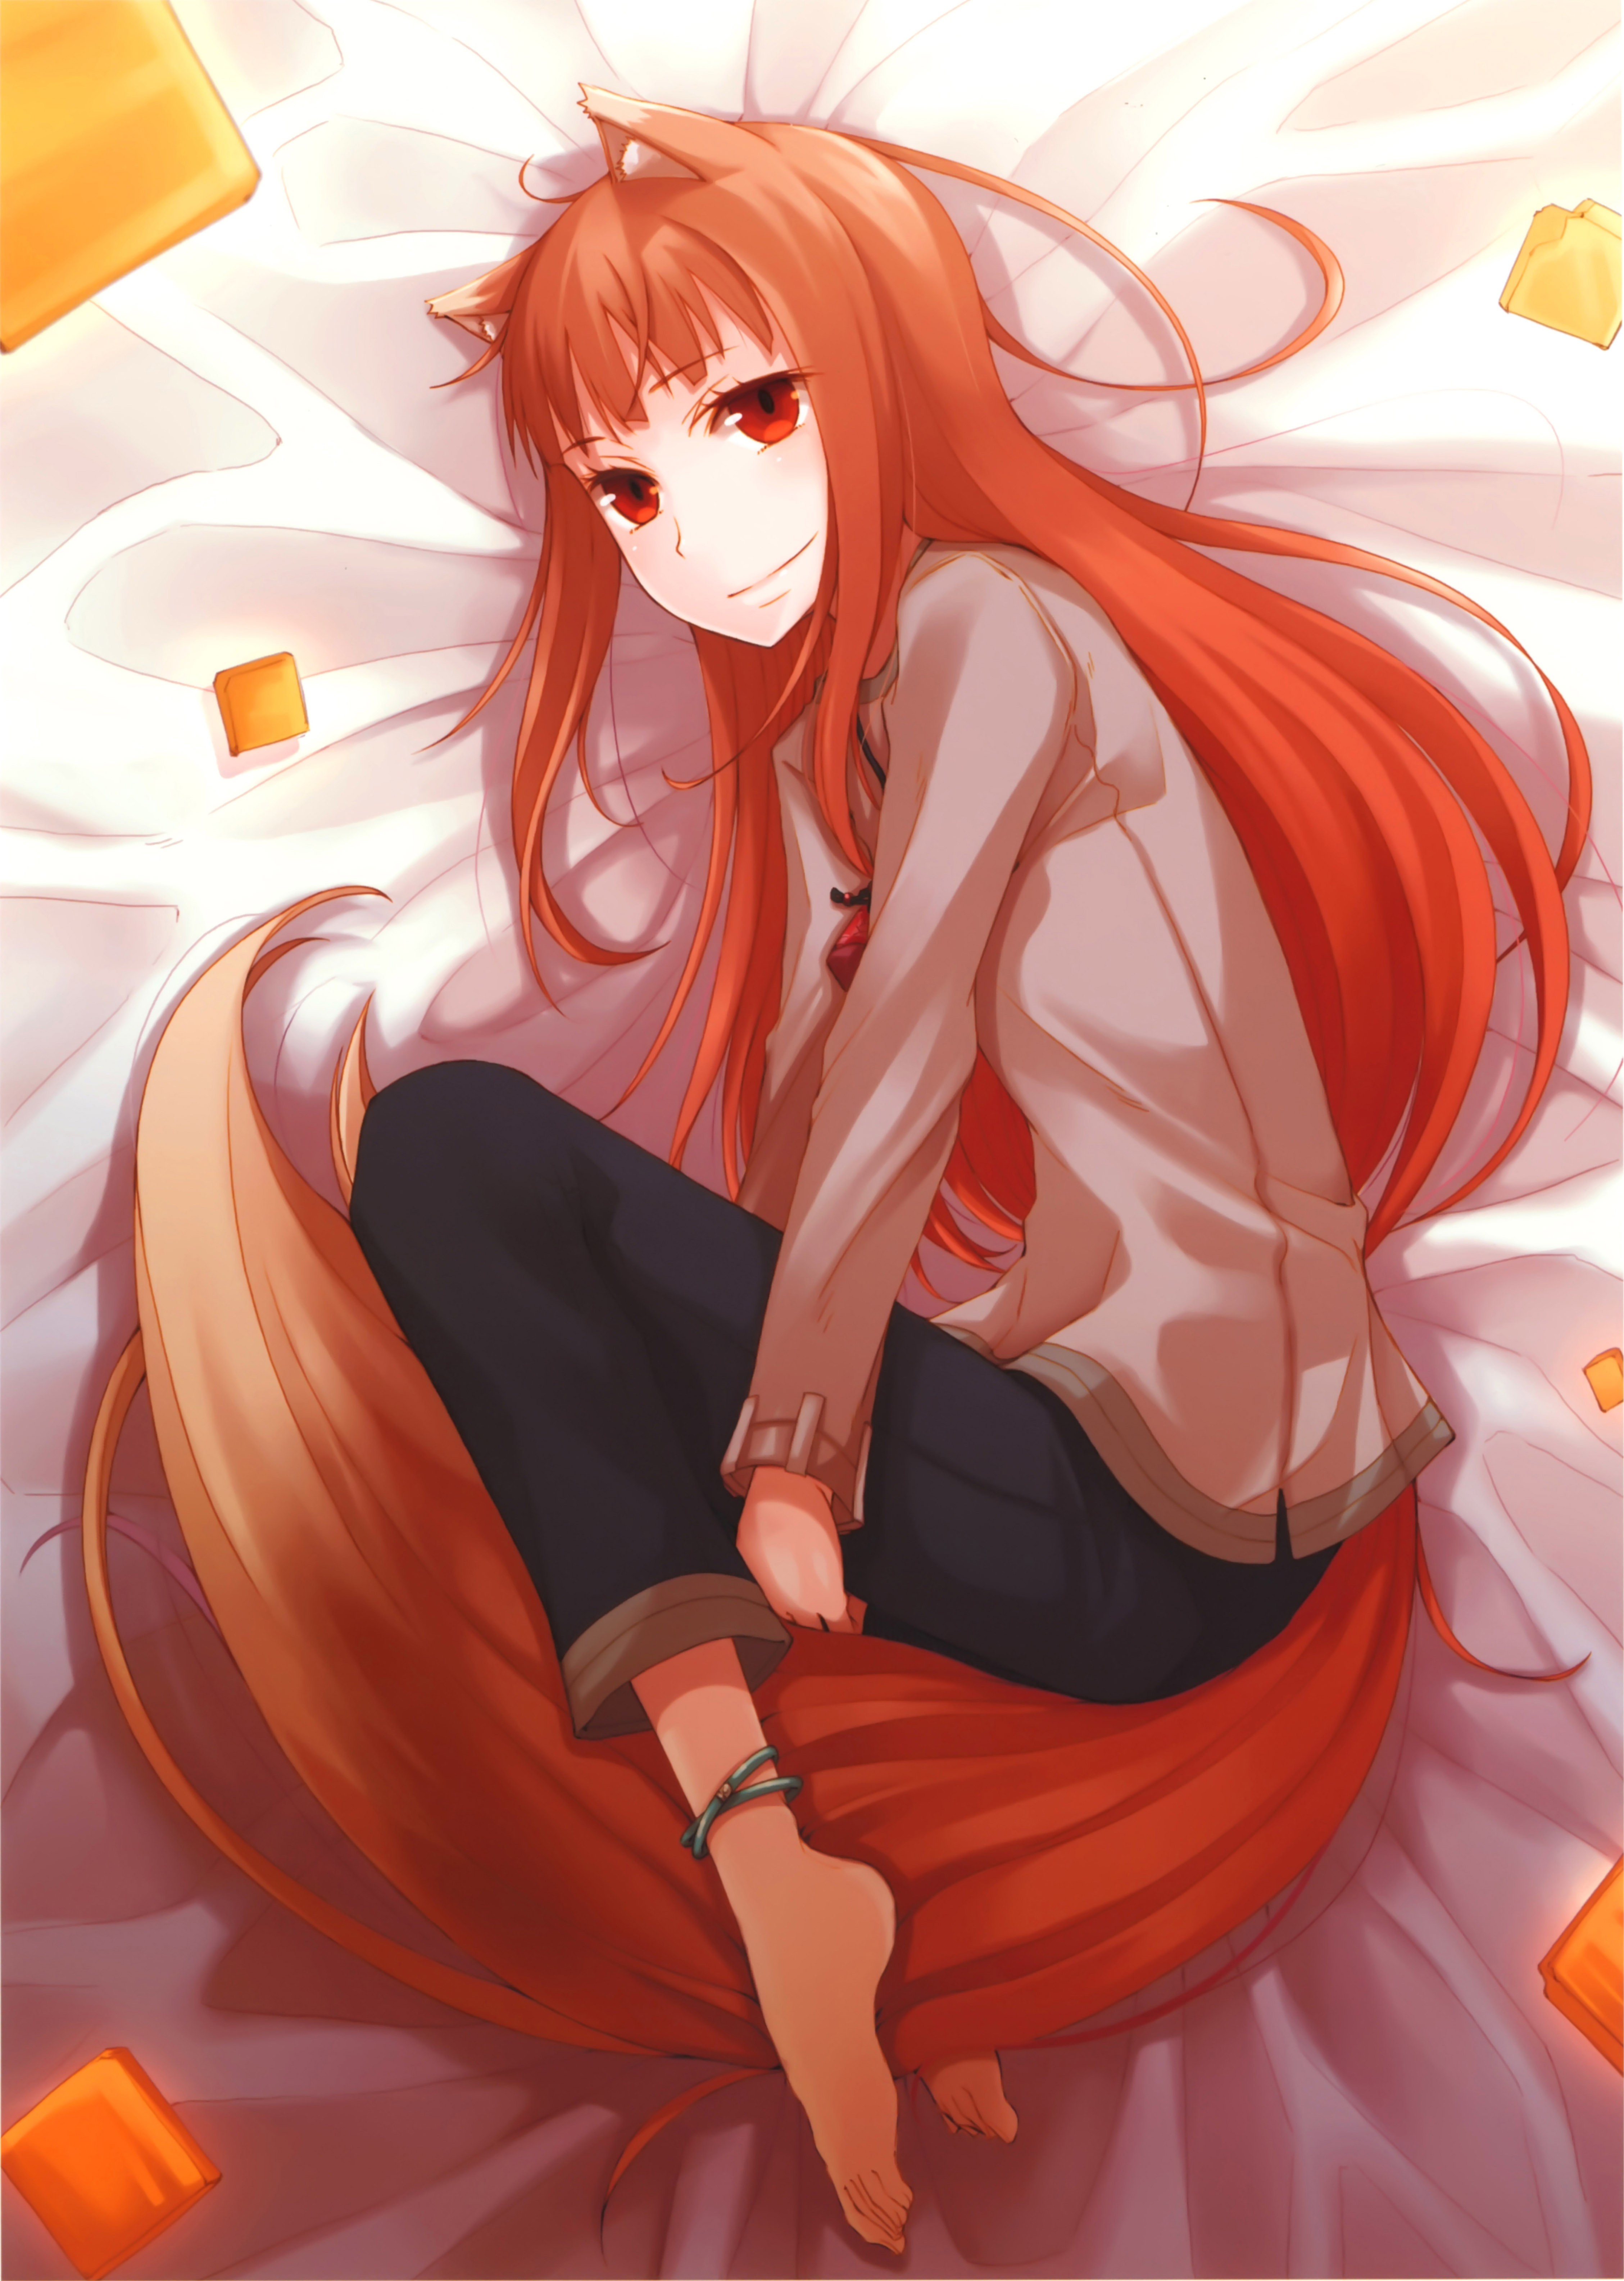 tails, Spice, And, Wolf, Redheads, Long, Hair, Animal, Ears, Red, Eyes